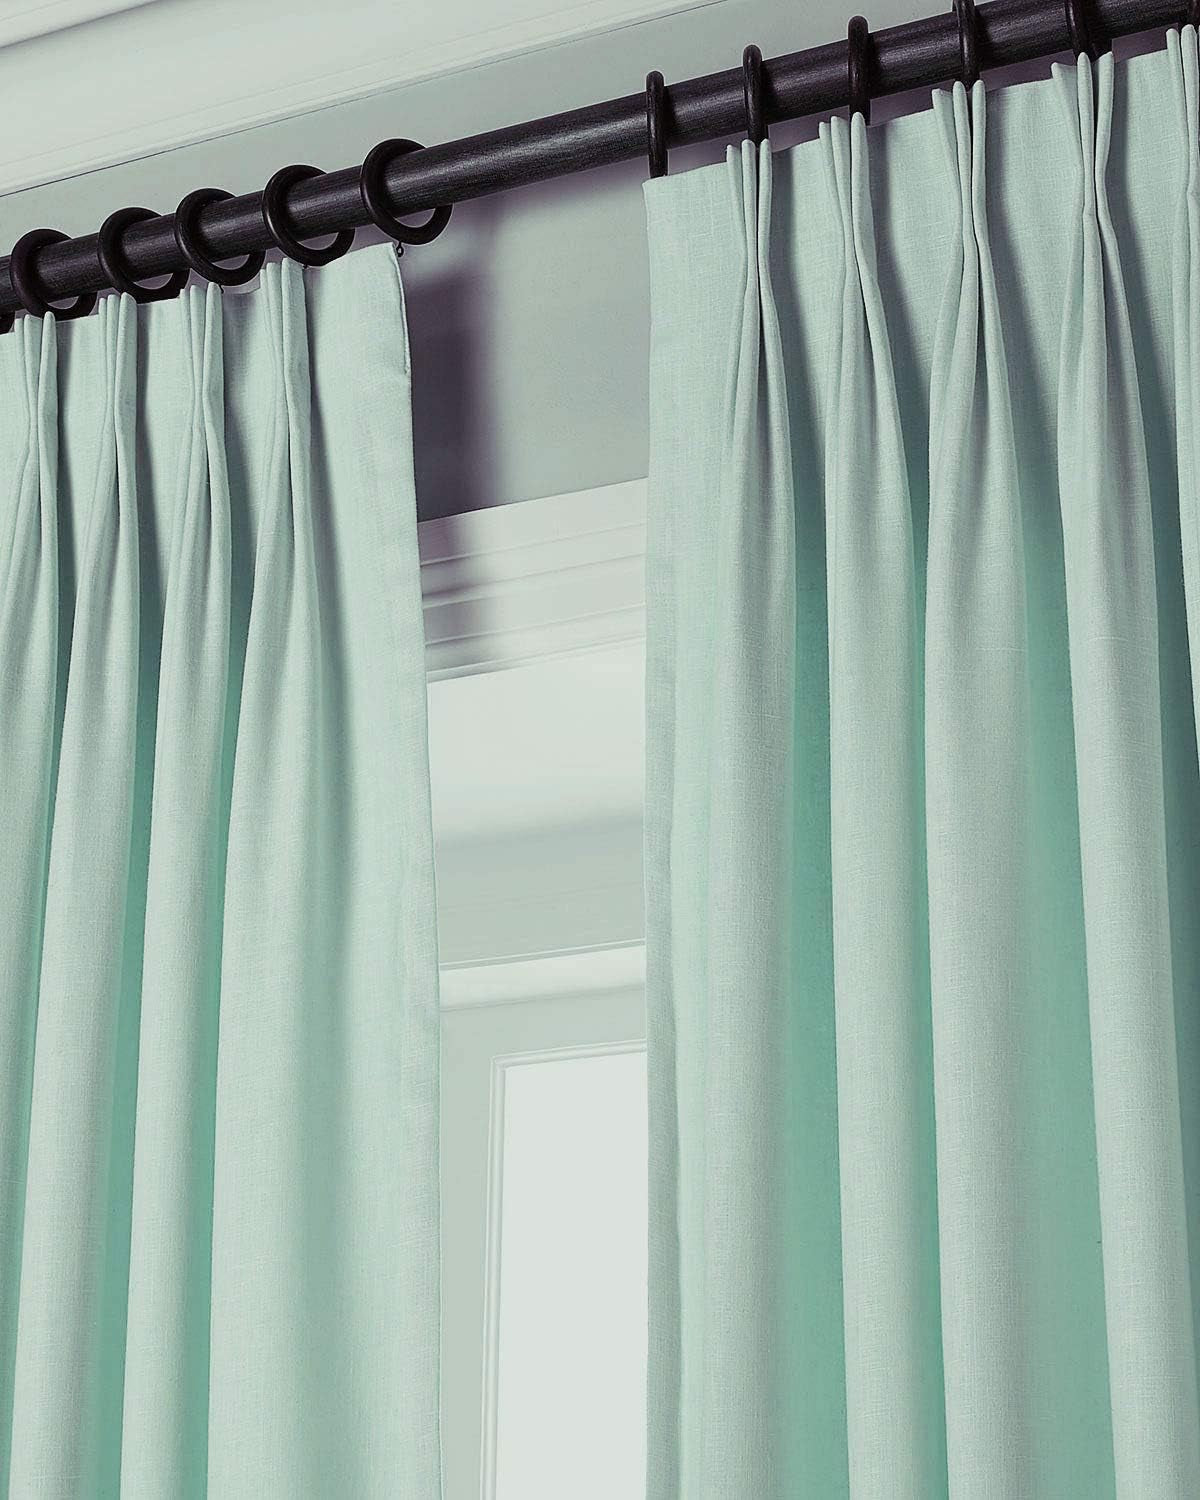 Silk N Drapes and More 100% Linen Pinch Pleated Lined Window Curtain Panel Drape (White, 27" W X 96" L)  imported Spa 27 In X 108 In (W X L) 